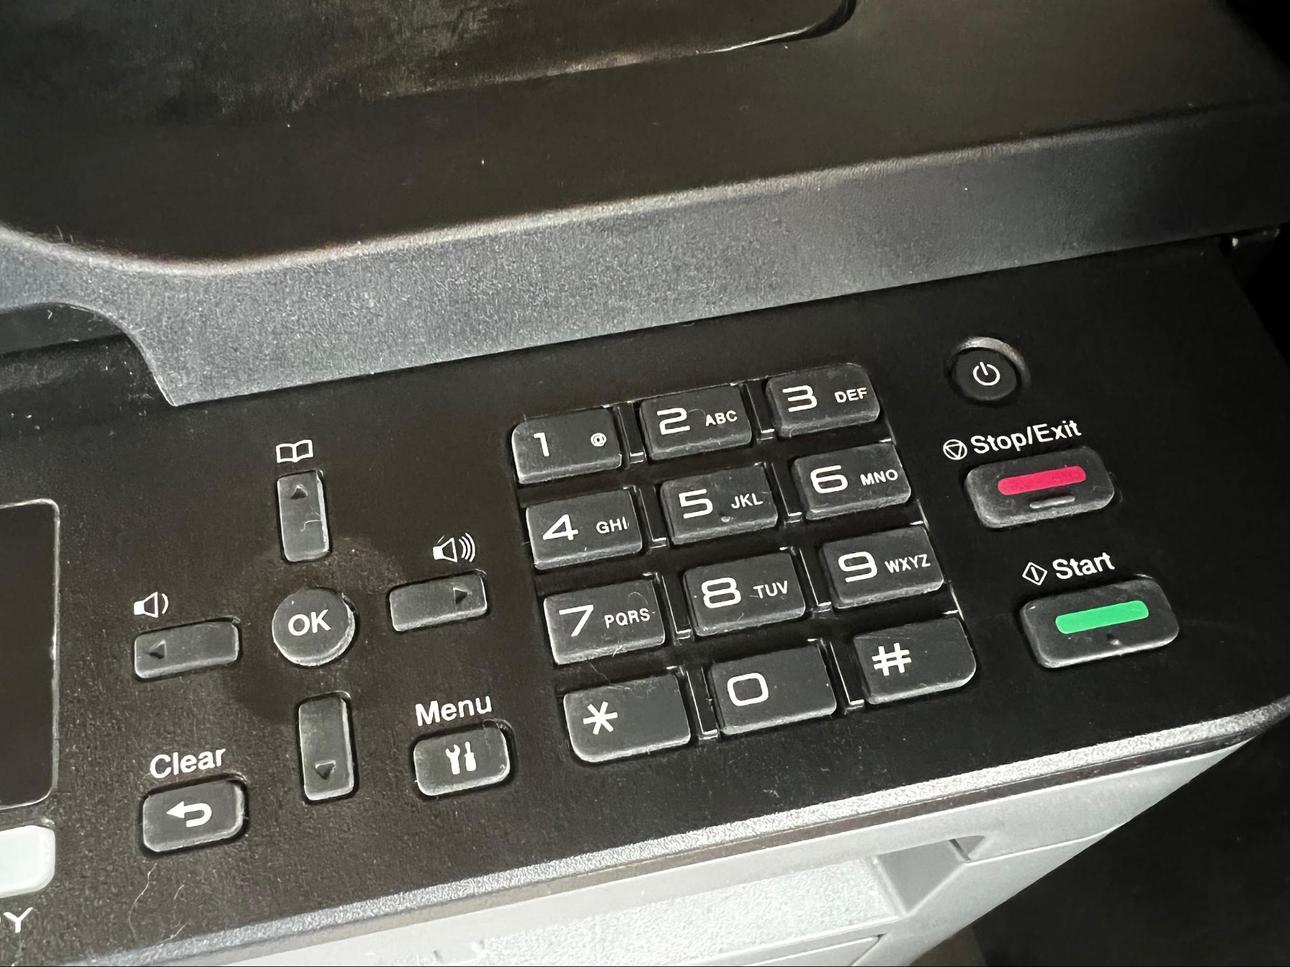 A picture of a printer, or more specifically the dial pad on the printer with the alphabet set onto buttons. For example 2 has A B C. What if you had to input a password on this?